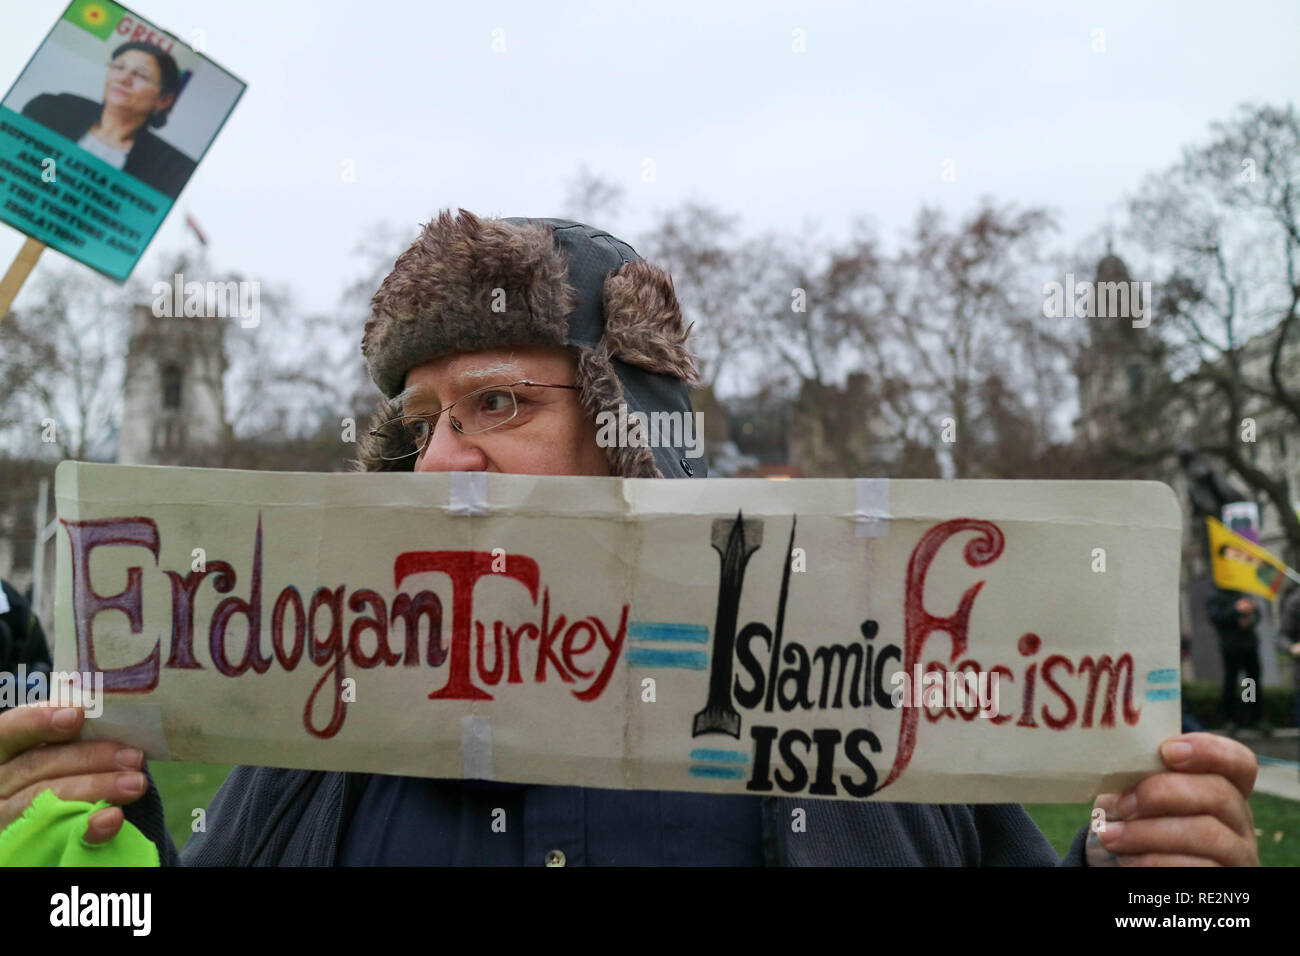 London, UK. 19th Jan, 2019. Demonstration to highlight jailed Kurdish politician Leyla Güven has reached a critical condition and has been unable to see her lawyer due to health problems caused by her long-running hunger strike. Penelope Barritt/Alamy Live News Stock Photo